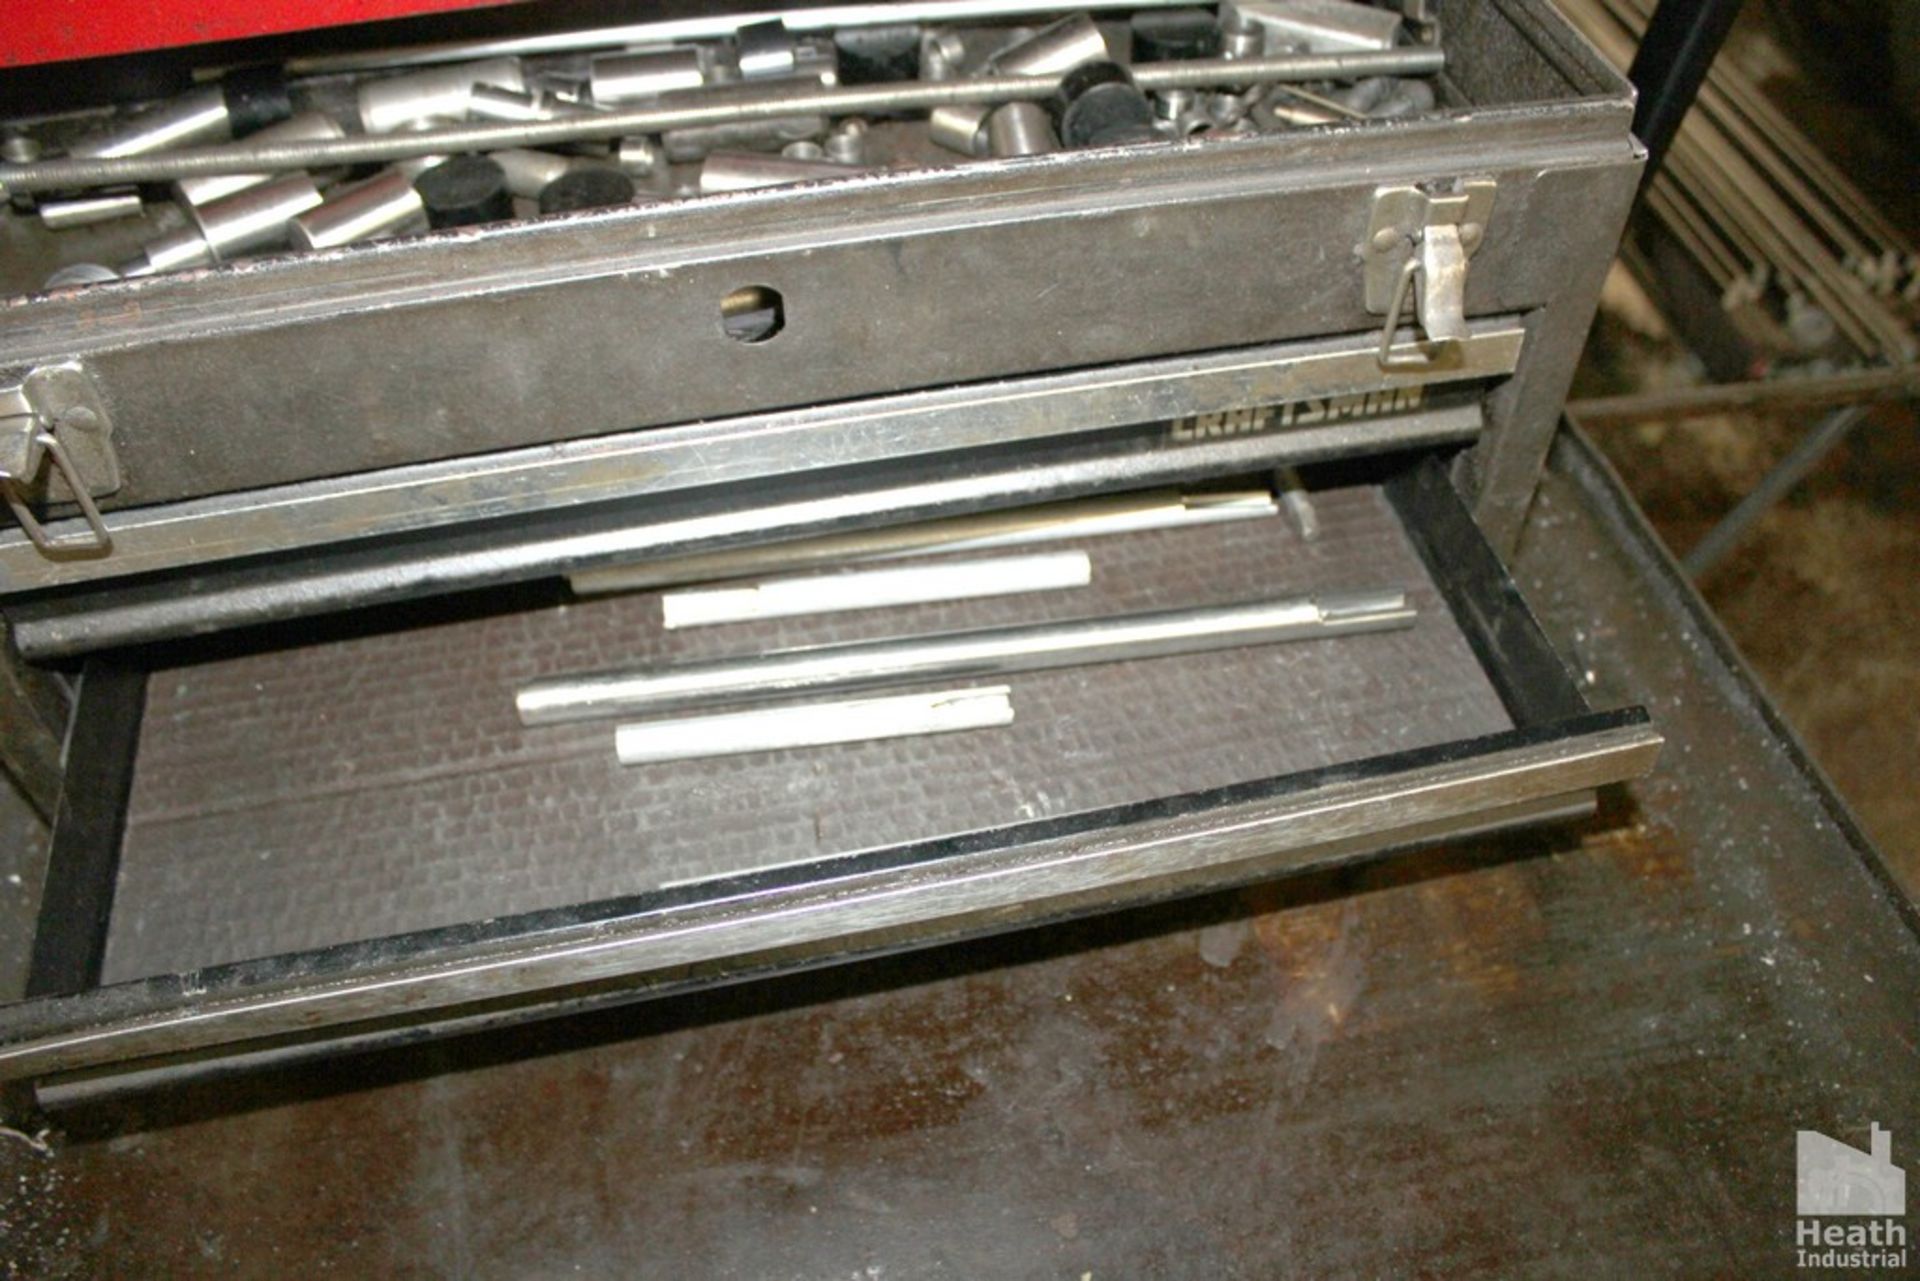 CRAFTSMAN THREE DRAWER TOOL BOX 21" X 9" X 12" WITH CONTENTS PARTS AND SUPPLIES - Image 3 of 4